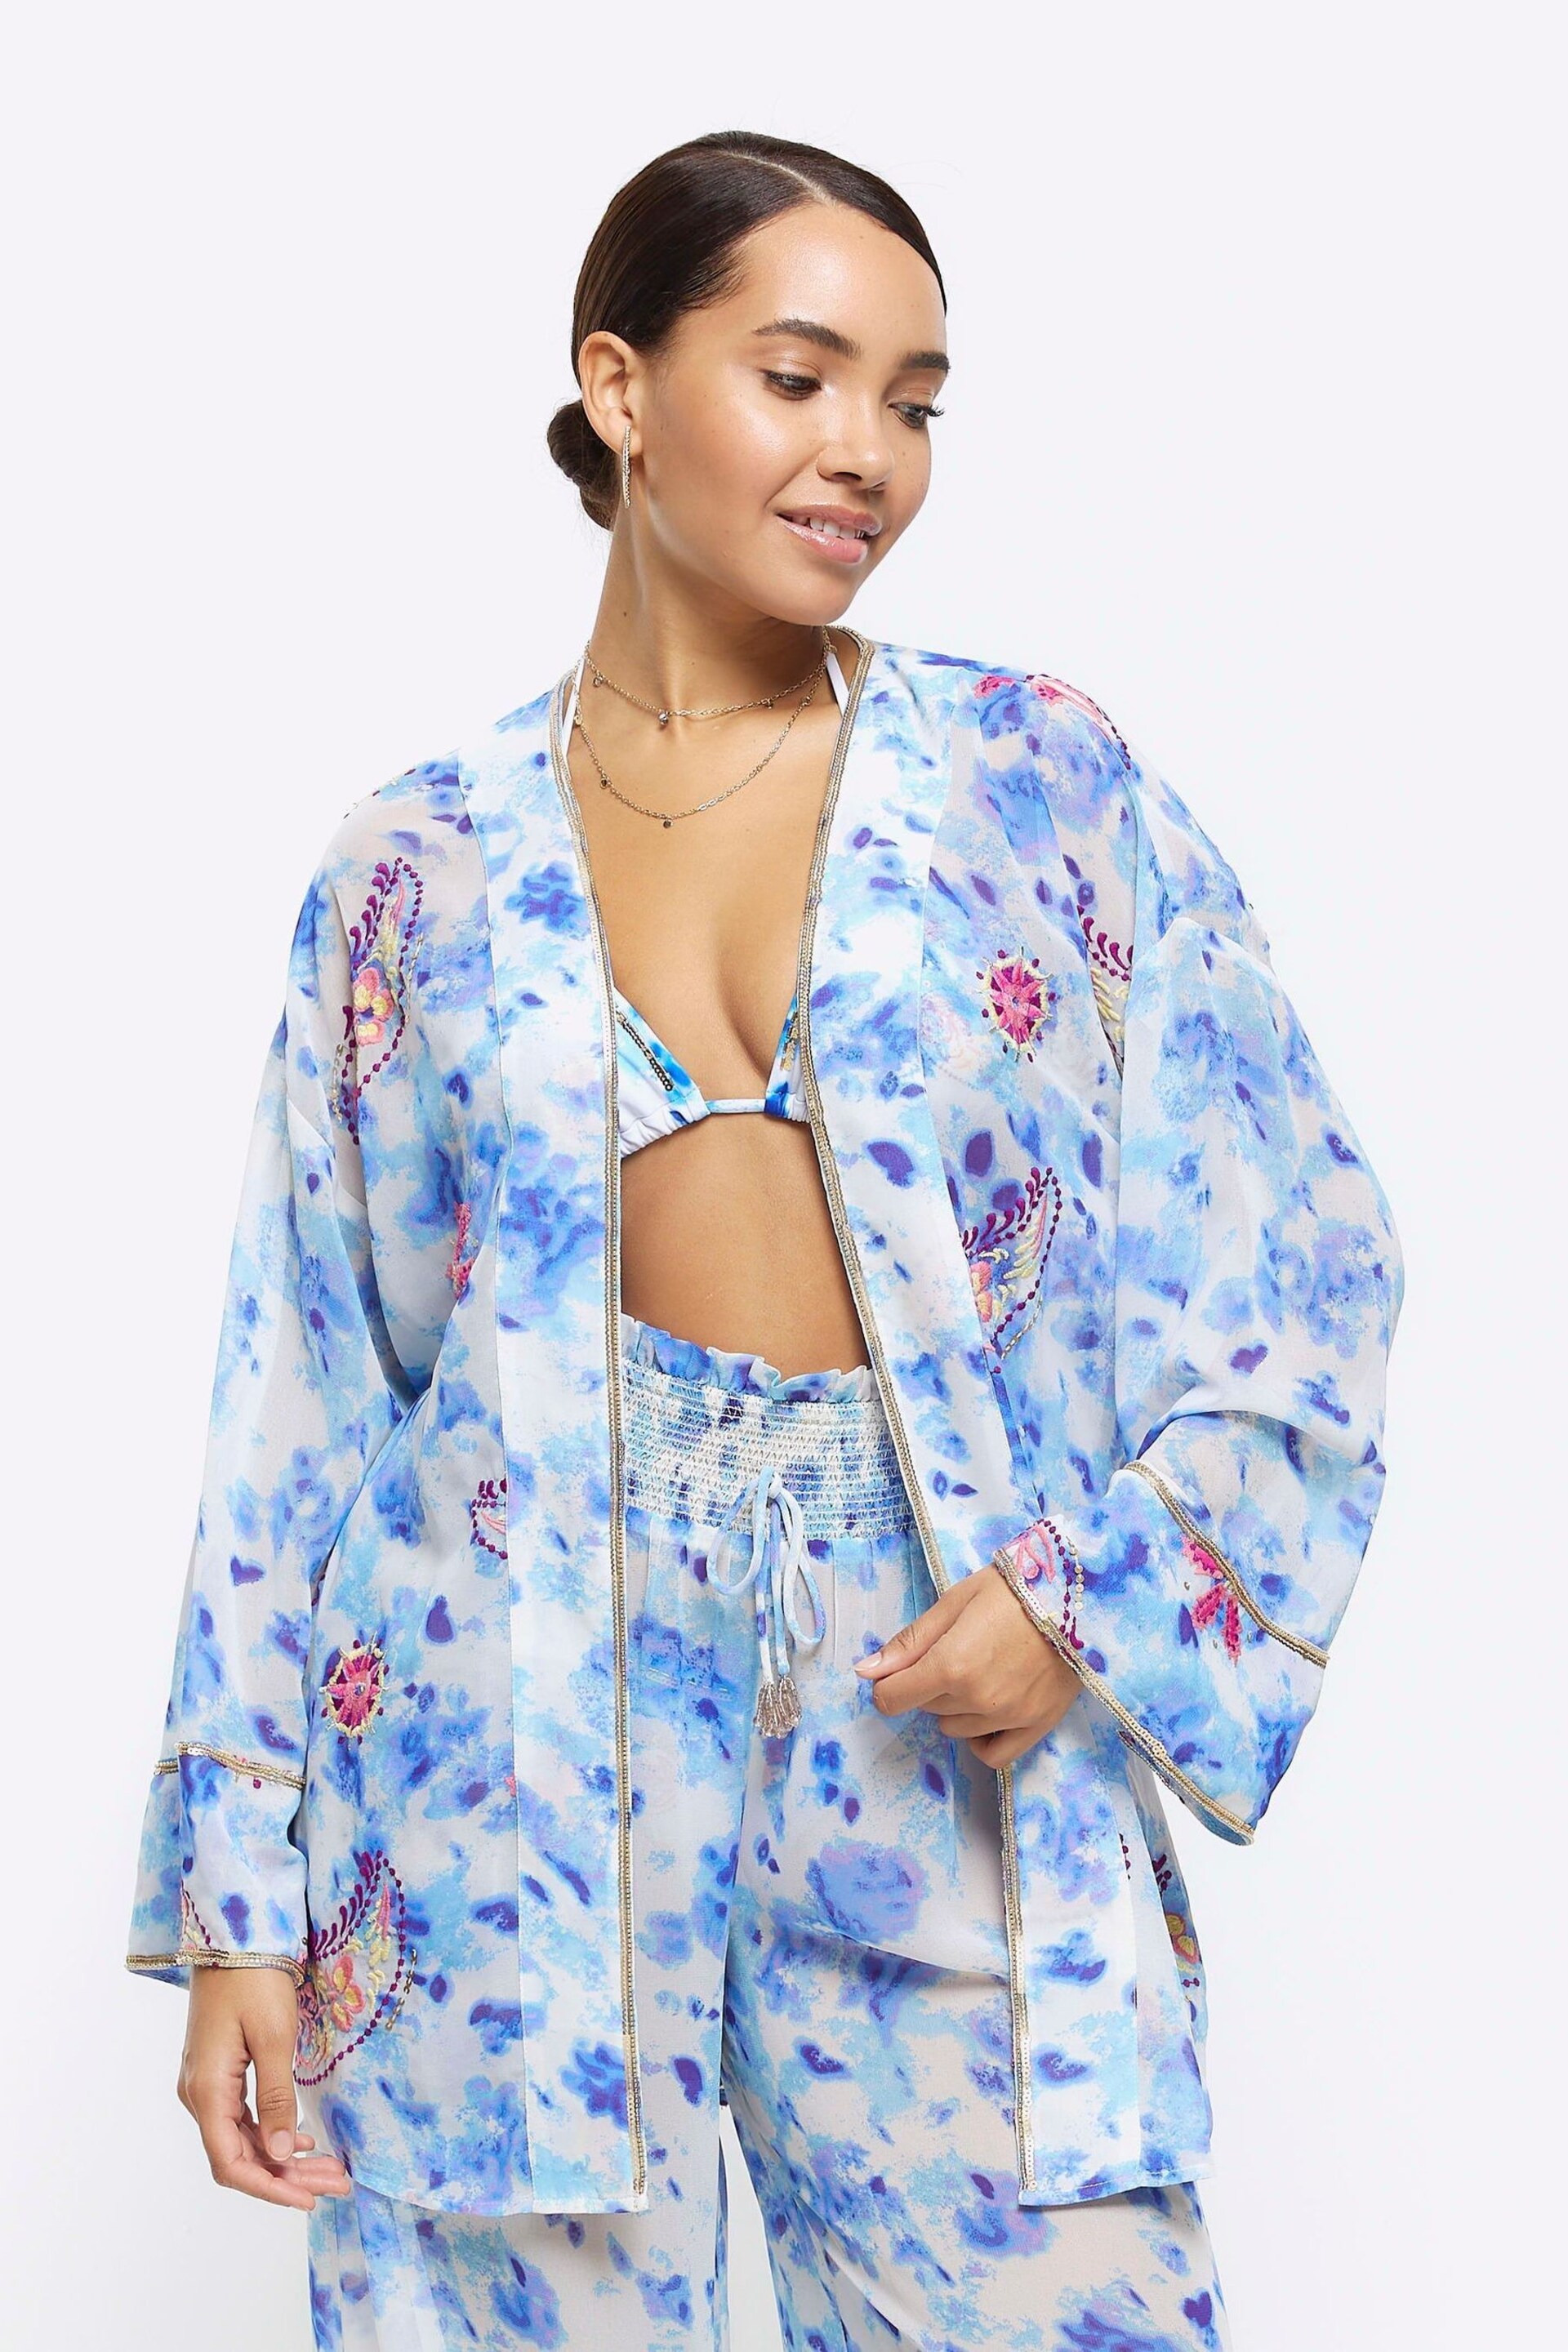 River Island Blue Embellished Tie Dye Kimono Cover-Up - Image 1 of 4